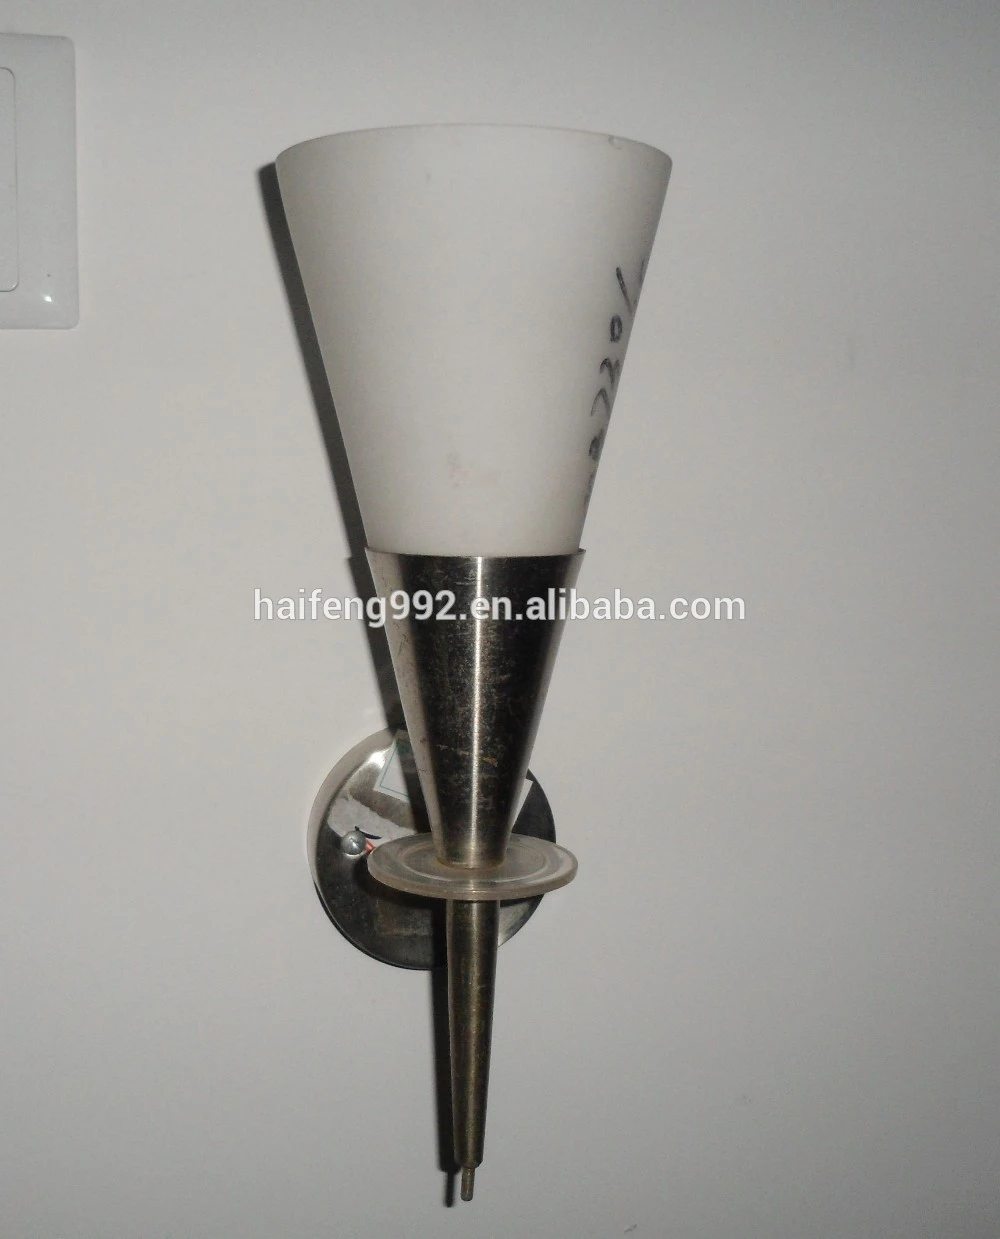 Mass production china supplier best price bathroom wall light/vanity light/wall sconce for hotel bathroom or rest room